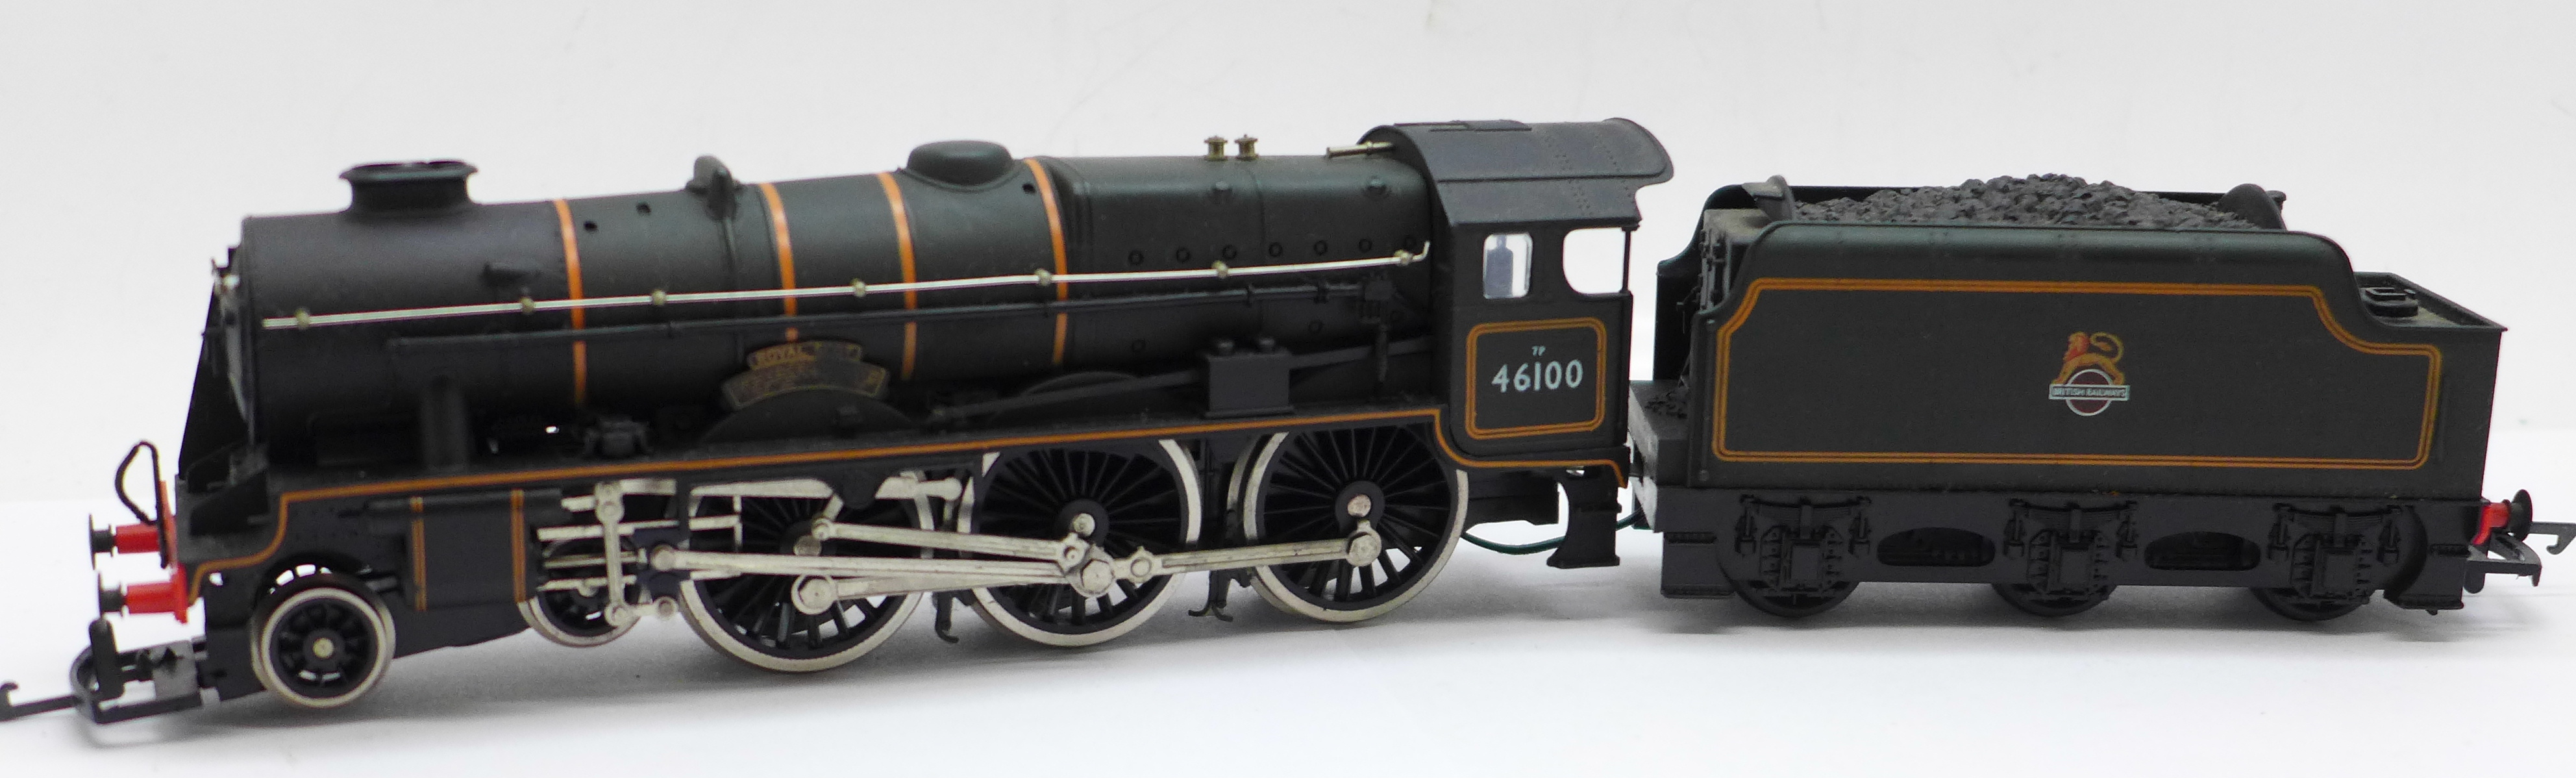 An Airfix OO gauge GMR 54121-6 locomotive and tender, boxed